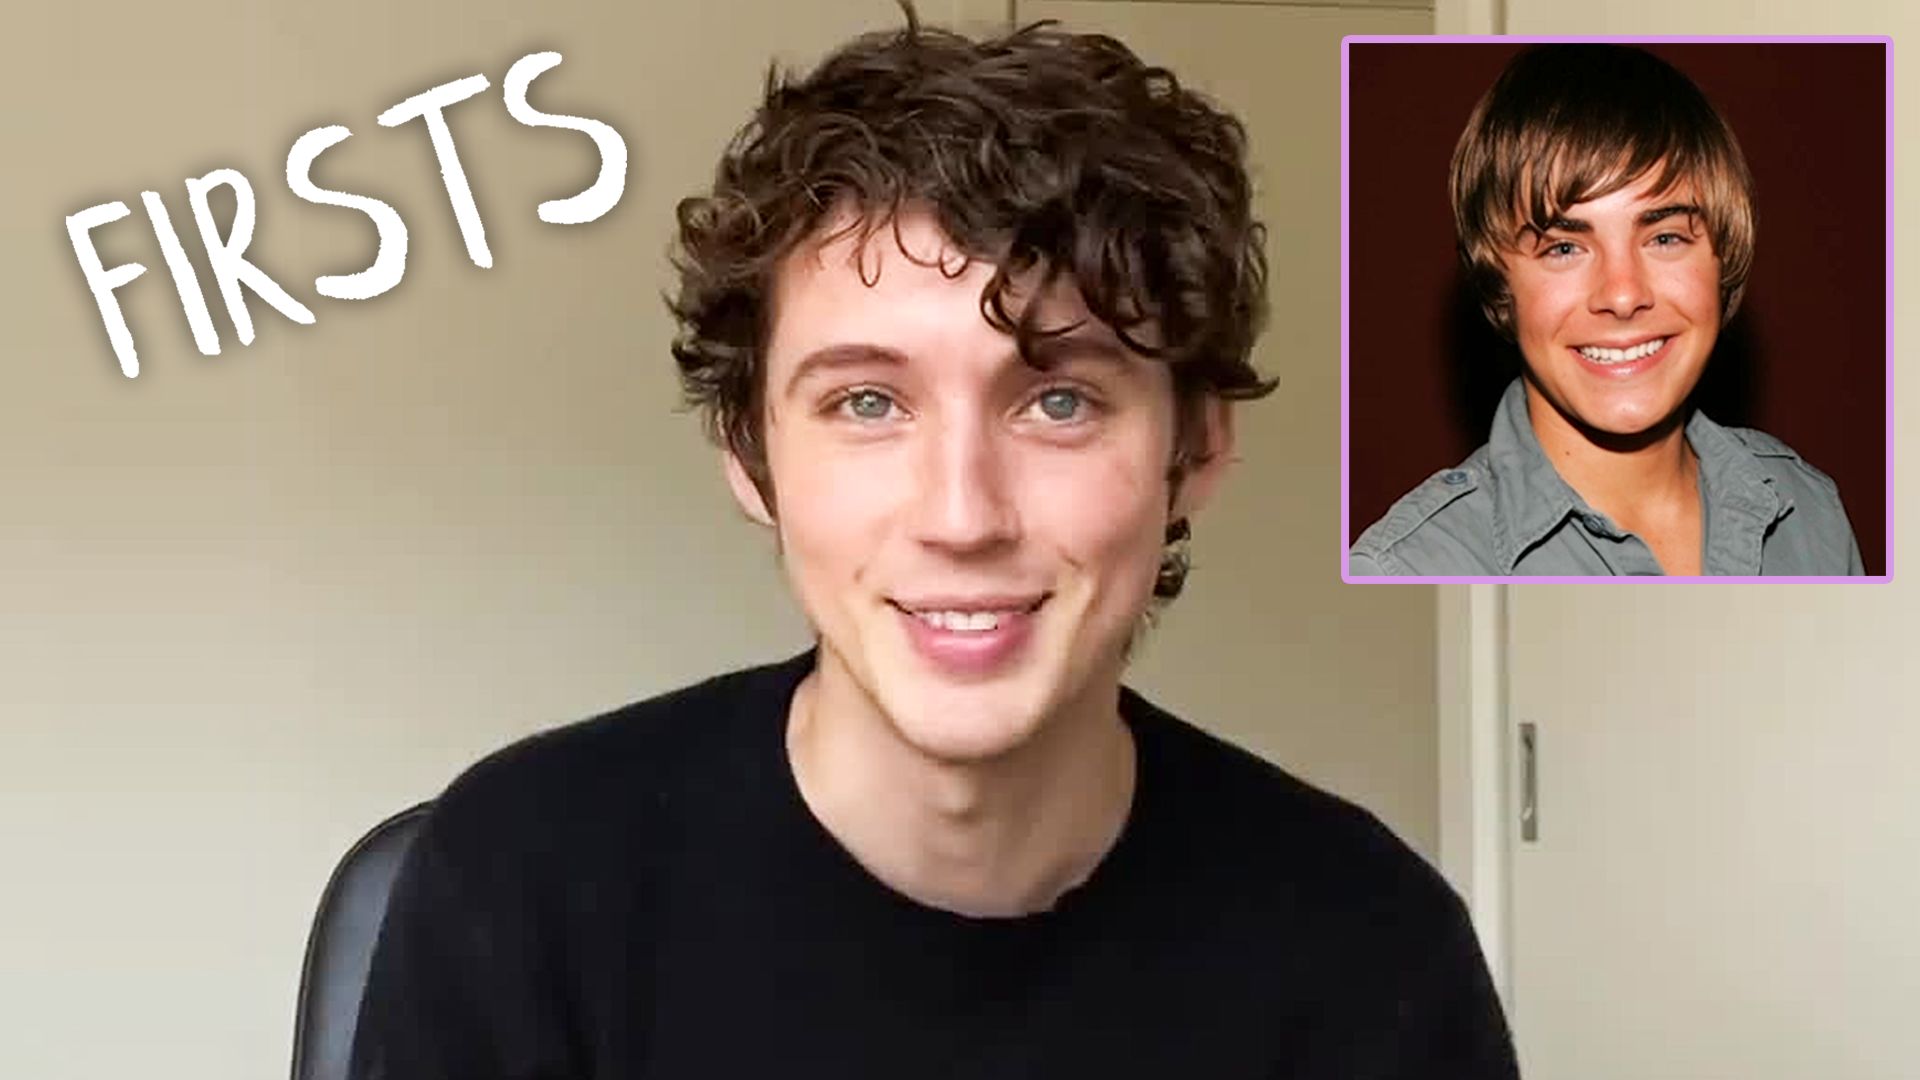 Watch Troye Sivan Shares His First Crush, Email Address & More | Firsts |  Teen Vogue